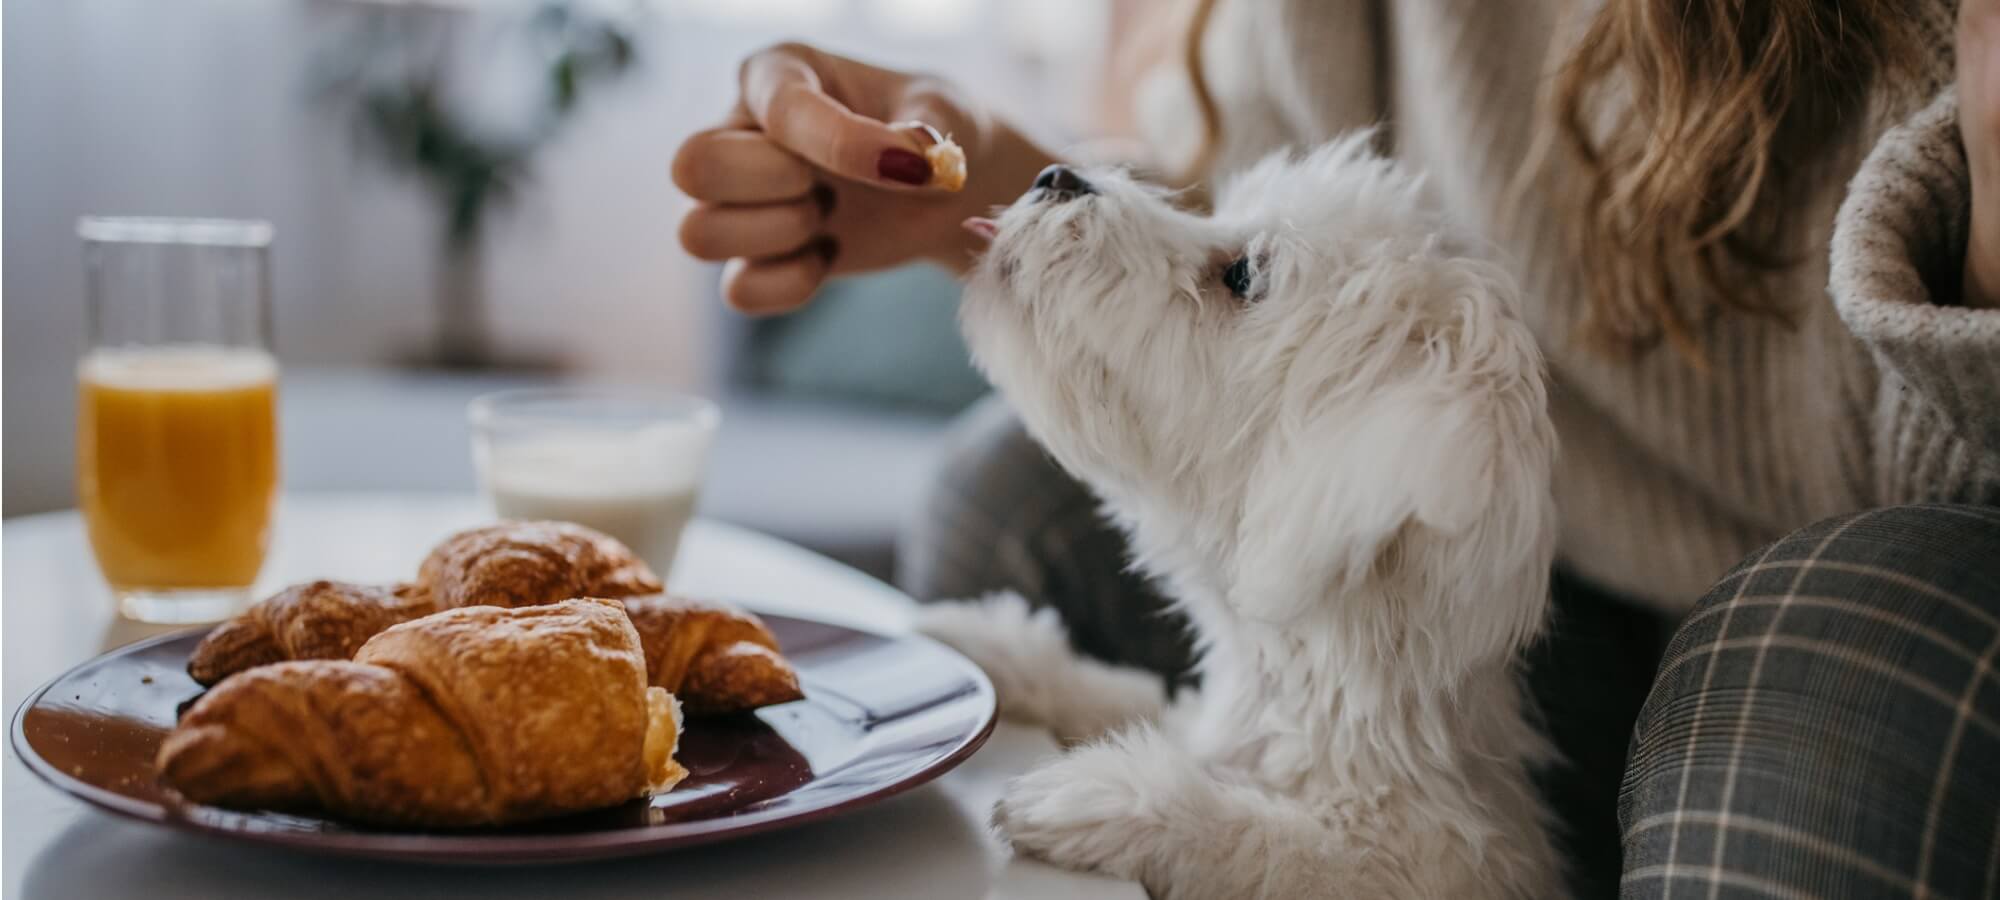 person feeding a small white dog a bite of croissant at the dining table